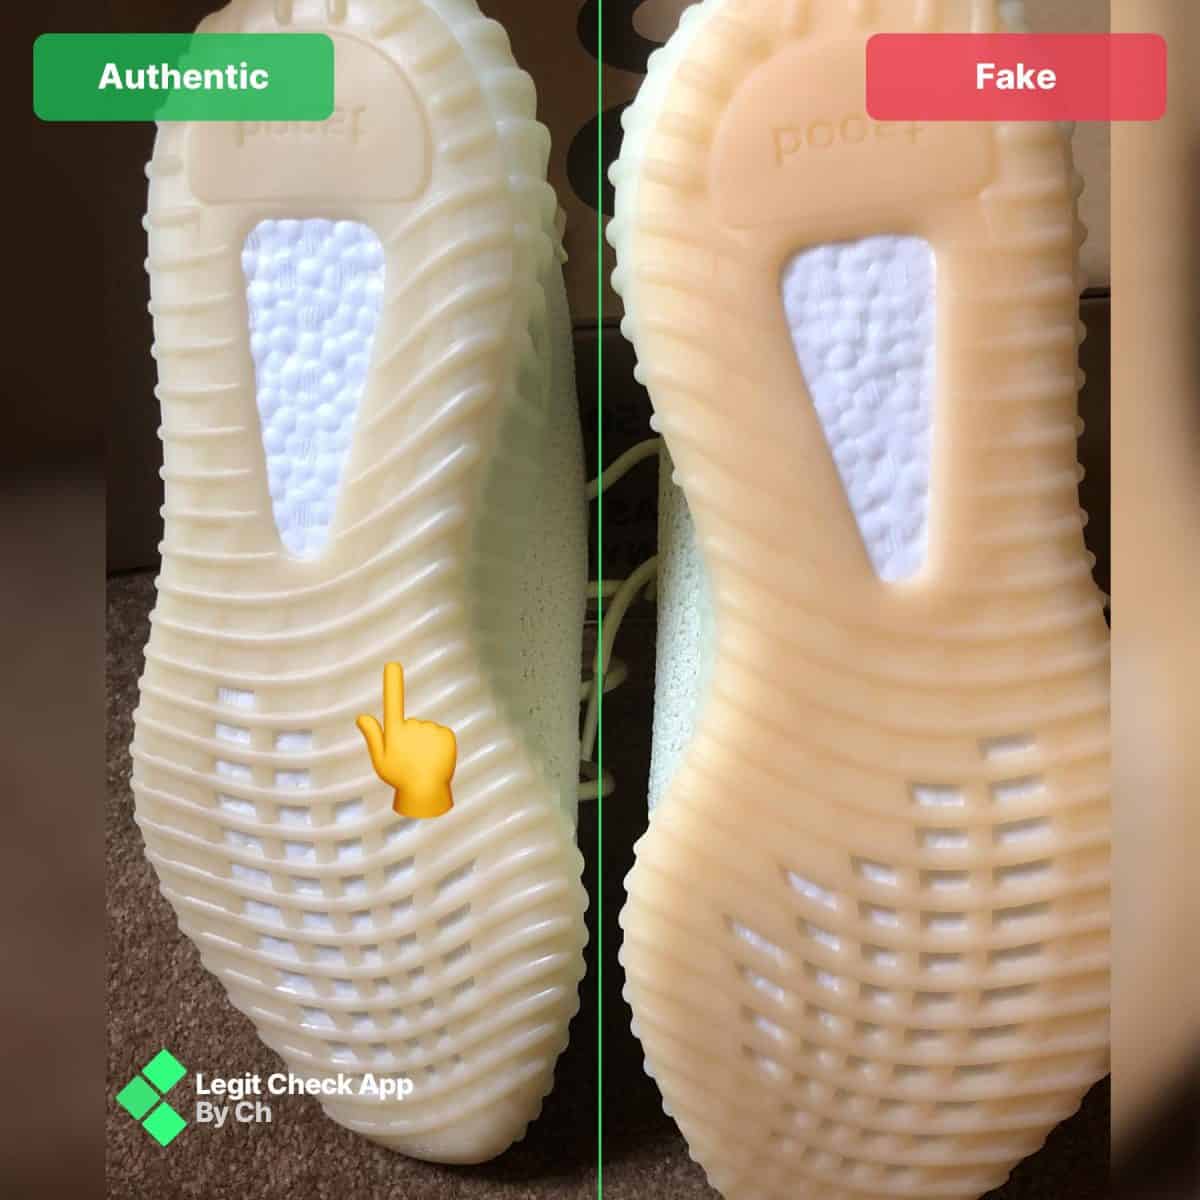 Yeezy Boost Butter Sole Fake vs Real